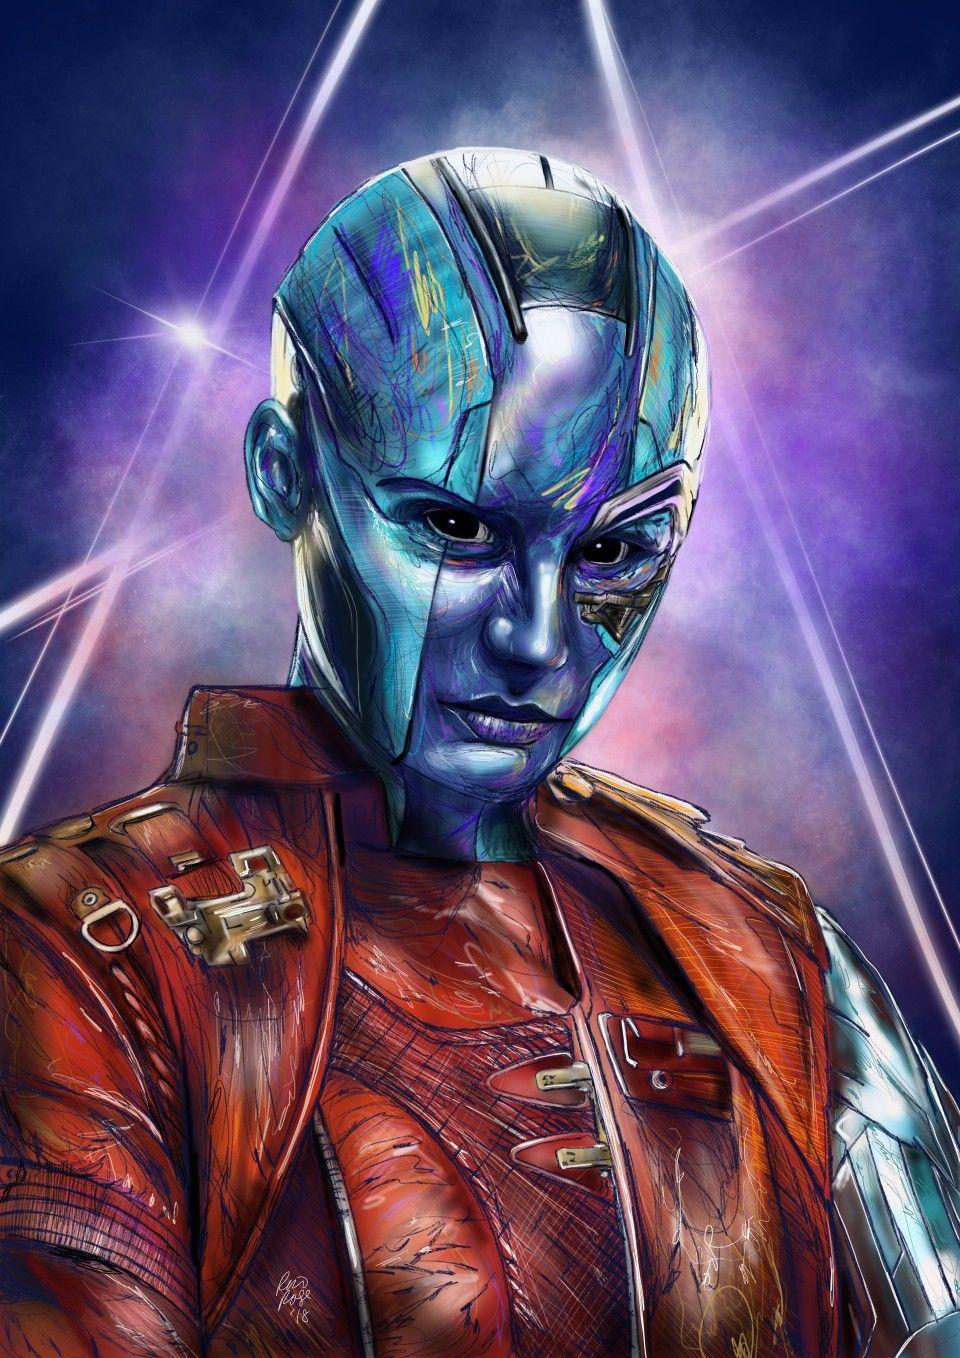 43 Hot Pictures Of Nebula Are Incredibly Excellent 387